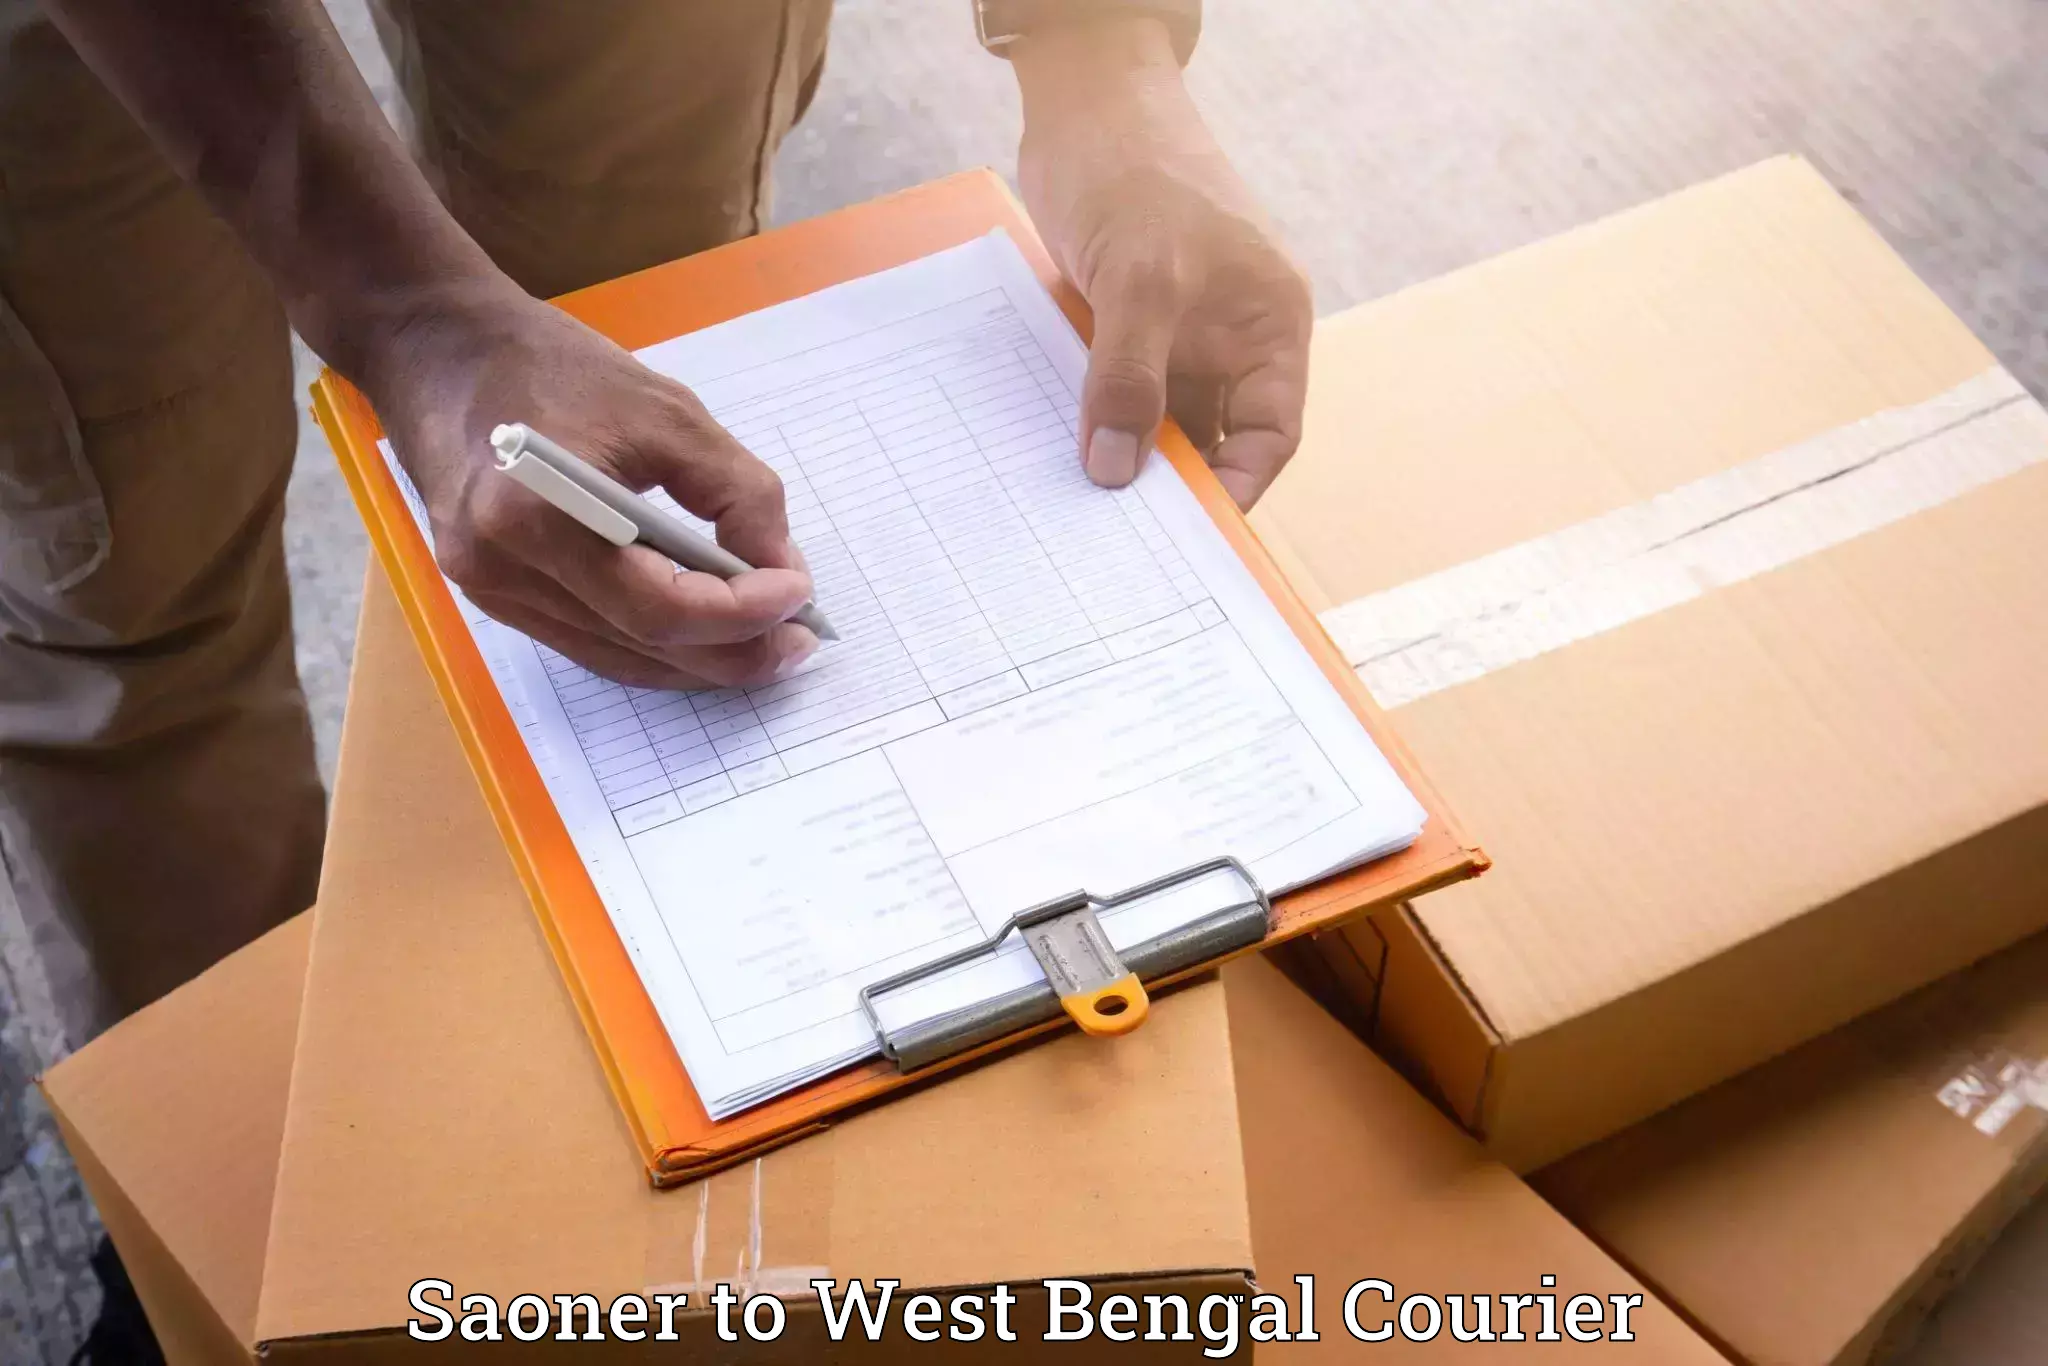 Furniture transport company Saoner to West Bengal